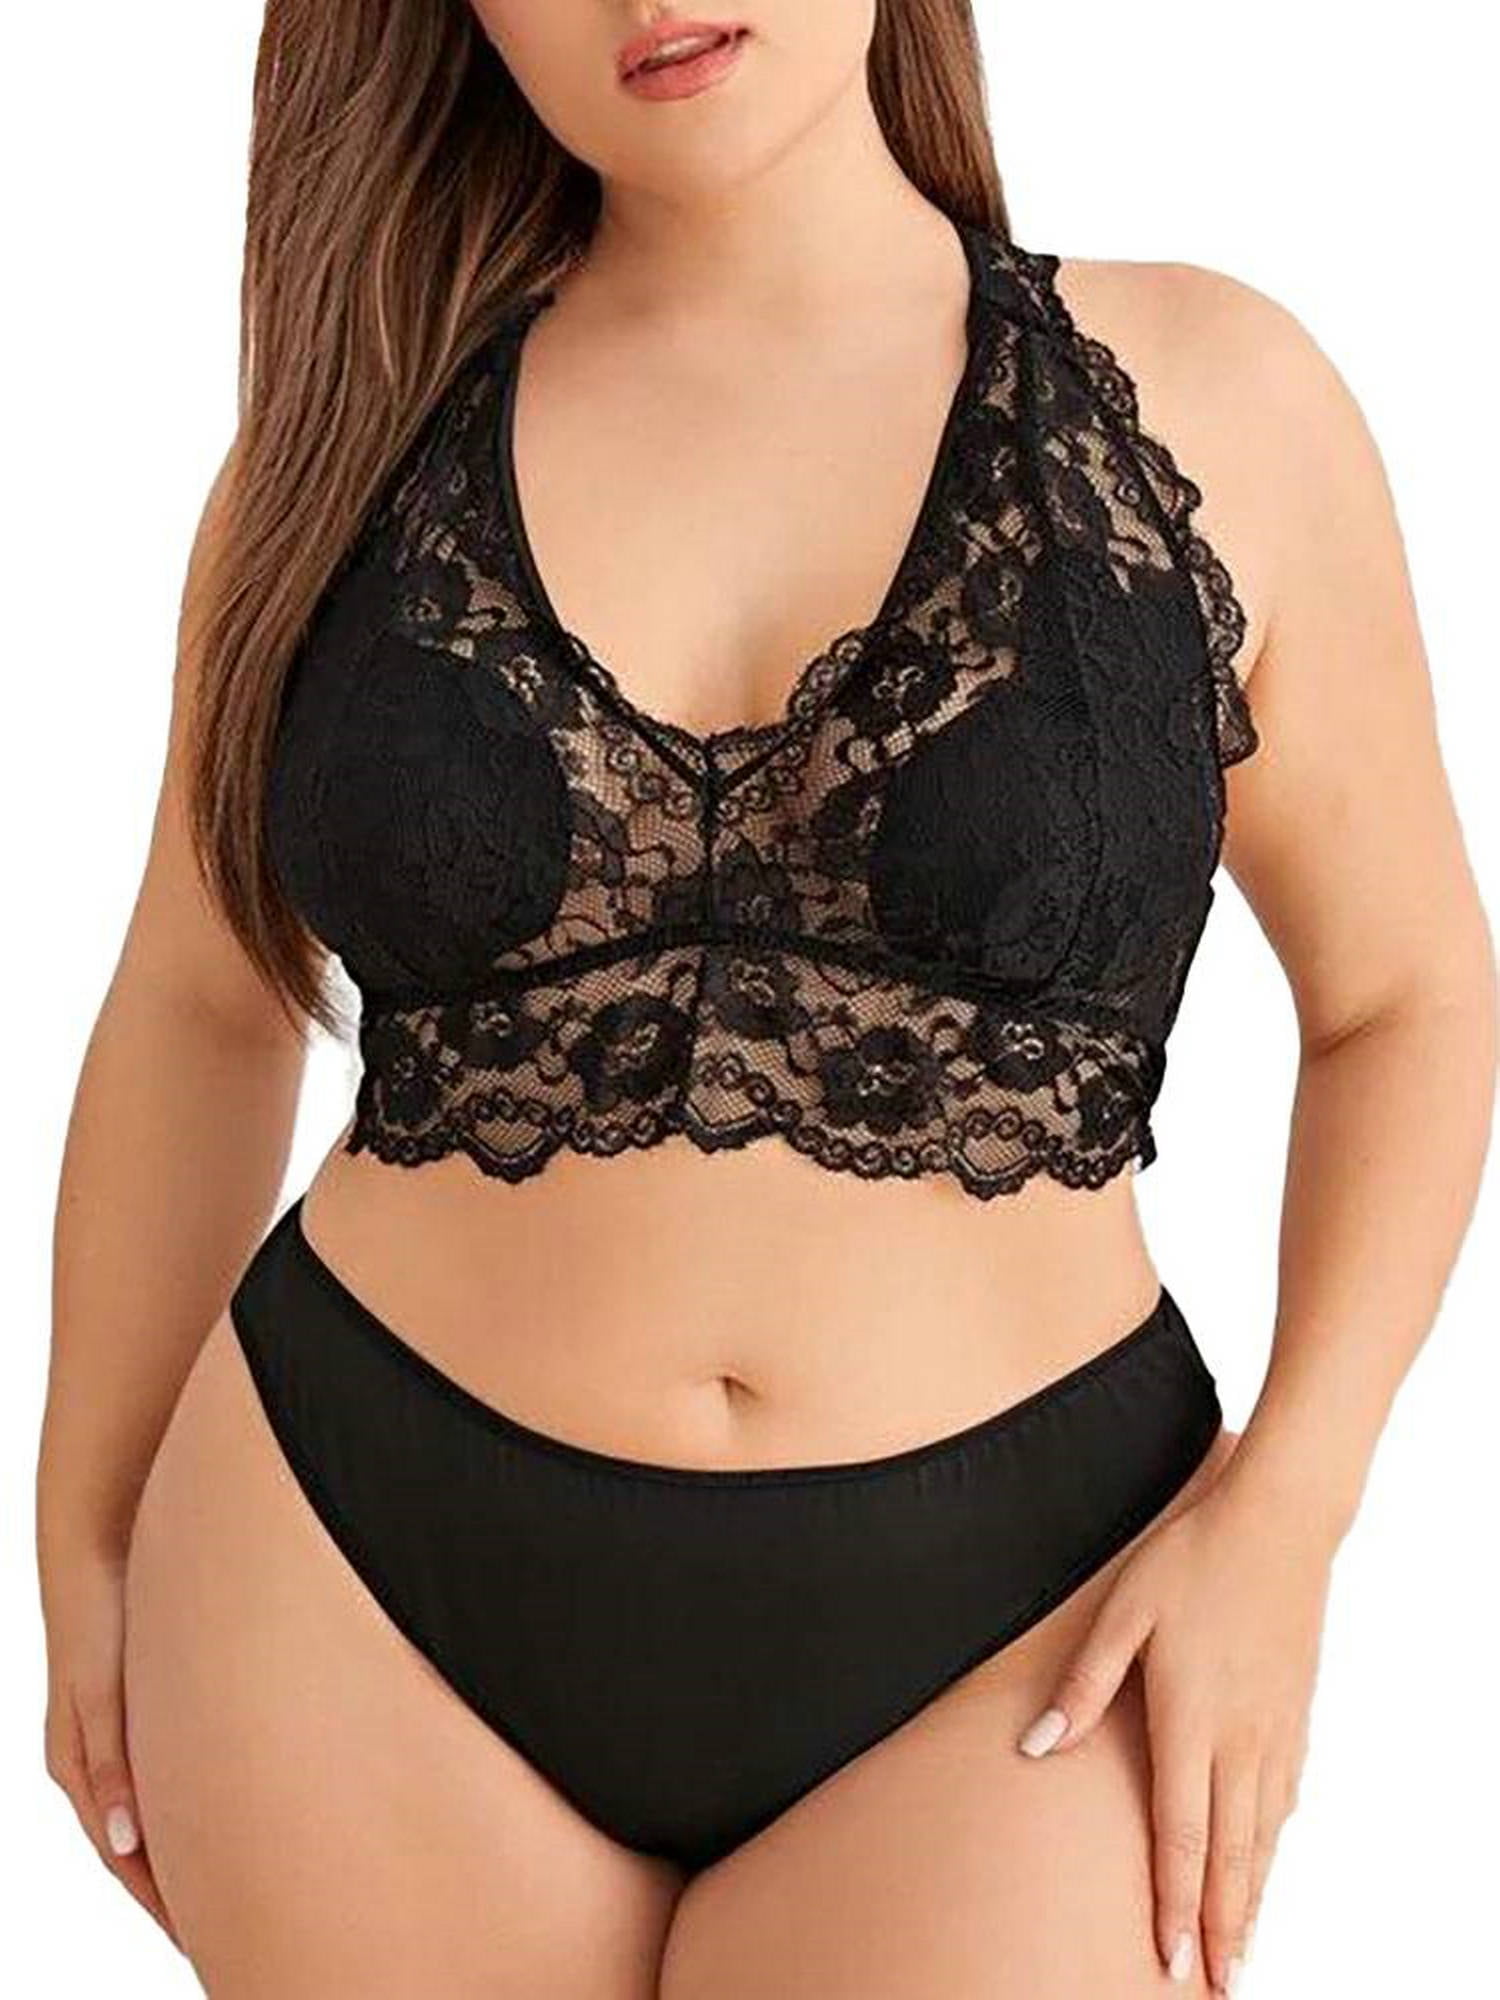 Plus Size Halter Lace Lingerie Set For Women Sexy Bra And Panty Black Lace  Underwear In 3XL 5XL Sizes Sleepwear1251U From Sadfk, $26.88